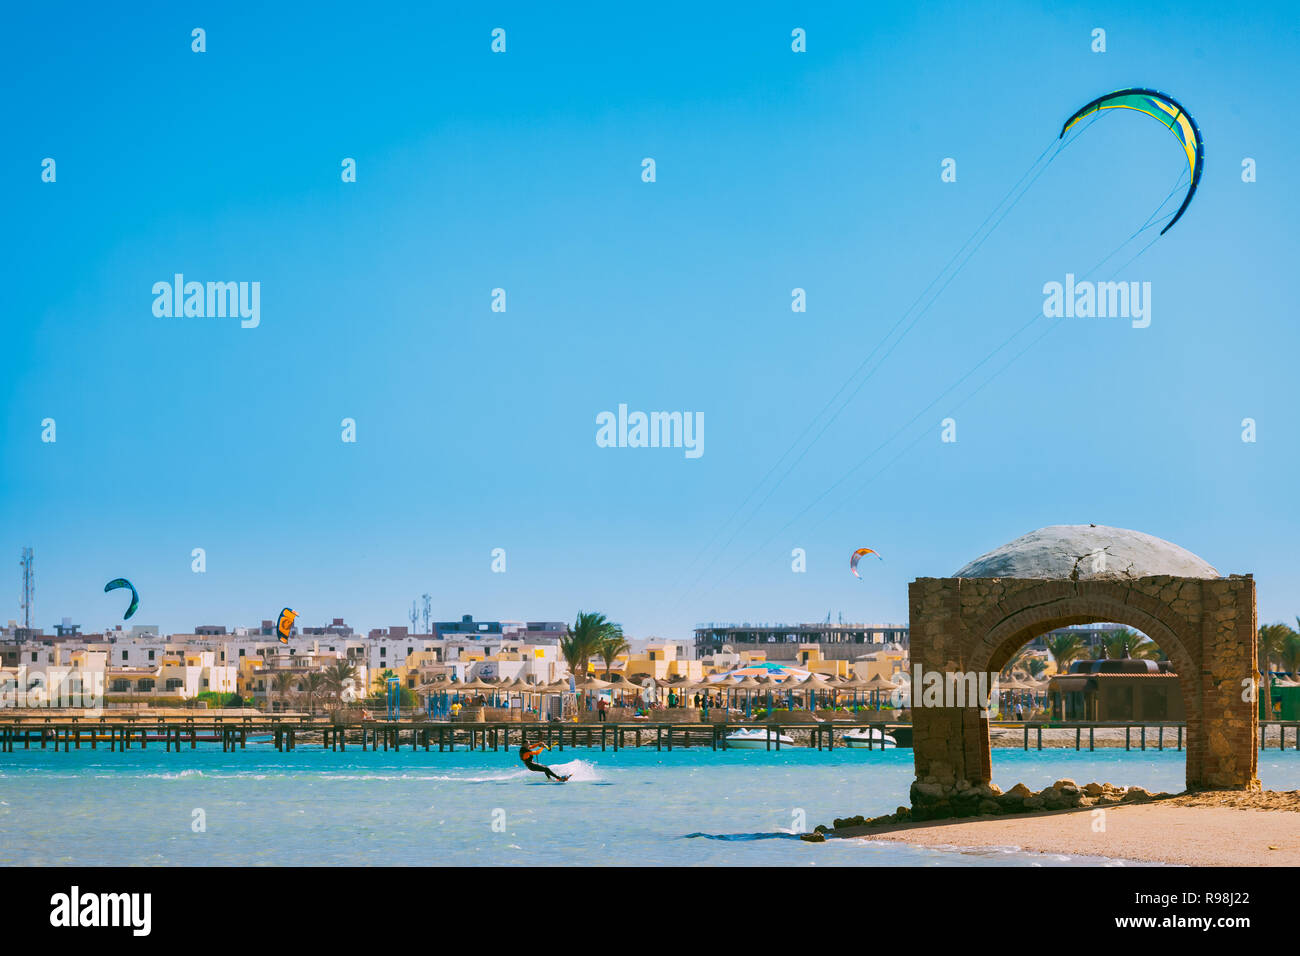 Egypt, Hurghada - 30 November, 2017: The kitesurfer gliding over the Red sea. The stunning beach with the arbor. The tourist attraction next to the Pa Stock Photo